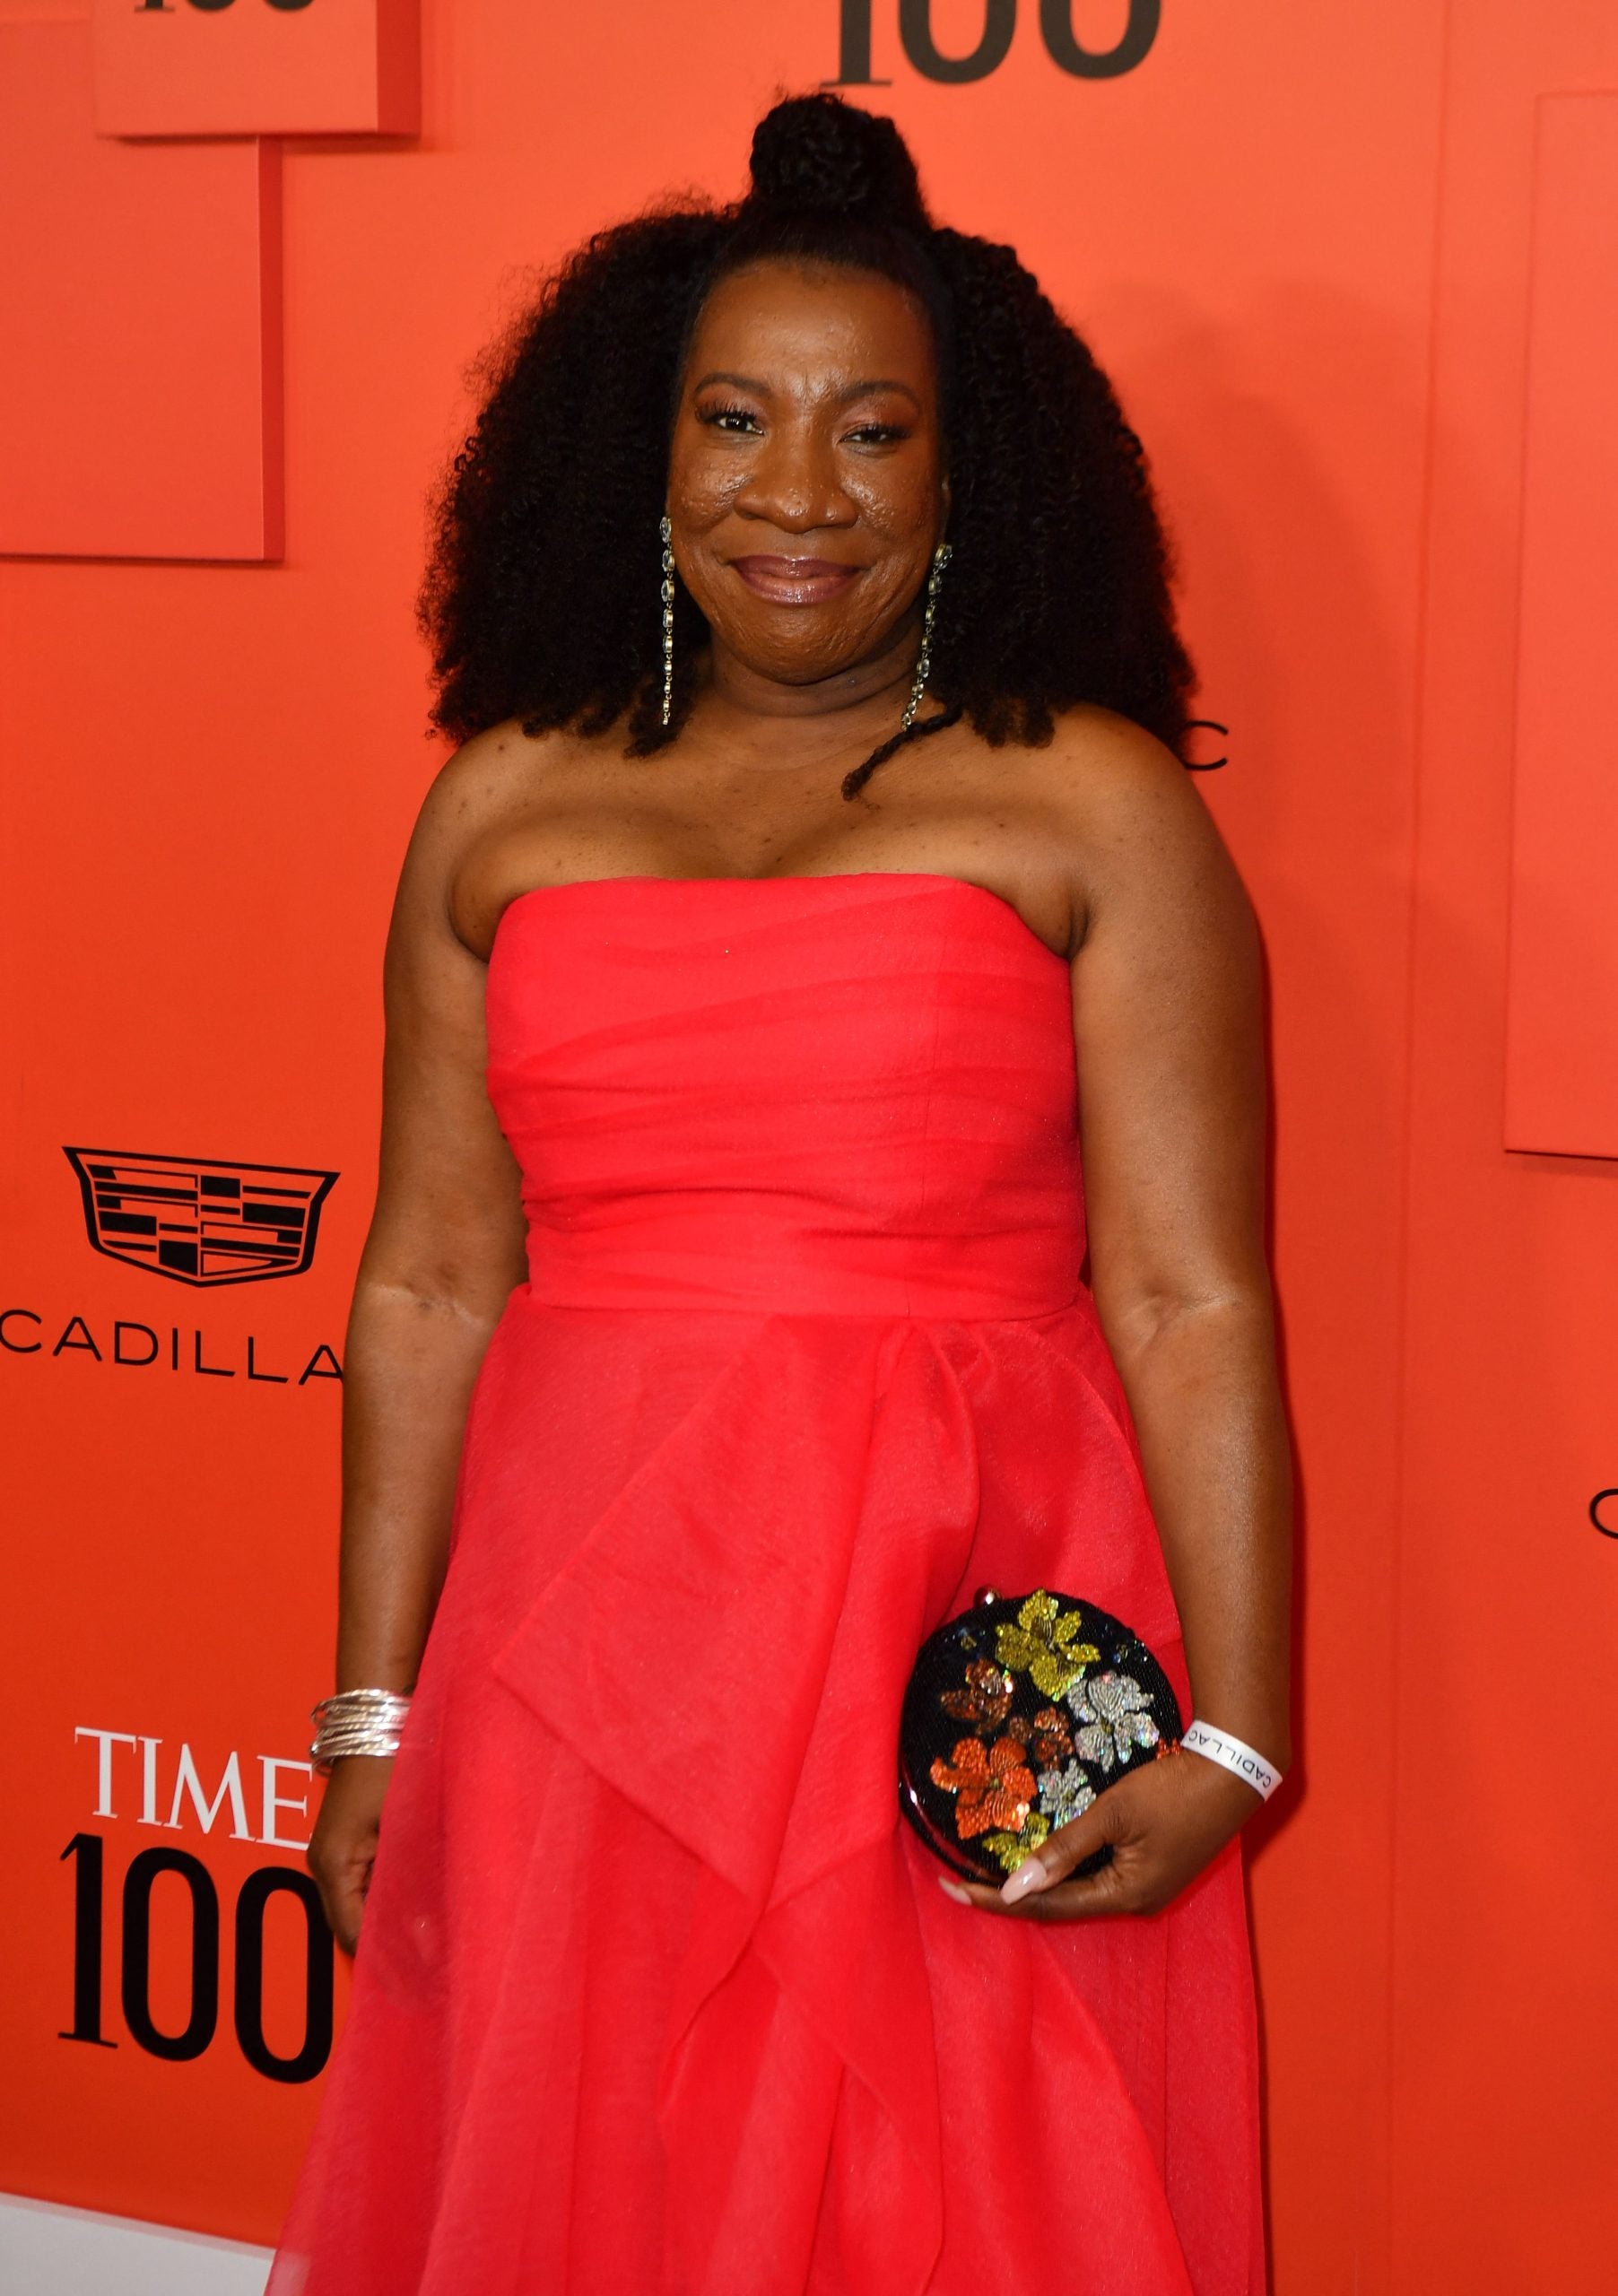 Star Gazing: Mary J Blige, Jazmine Sullivan, Zendaya, and More Influential Figures Dazzle At The TIME 100 Gala